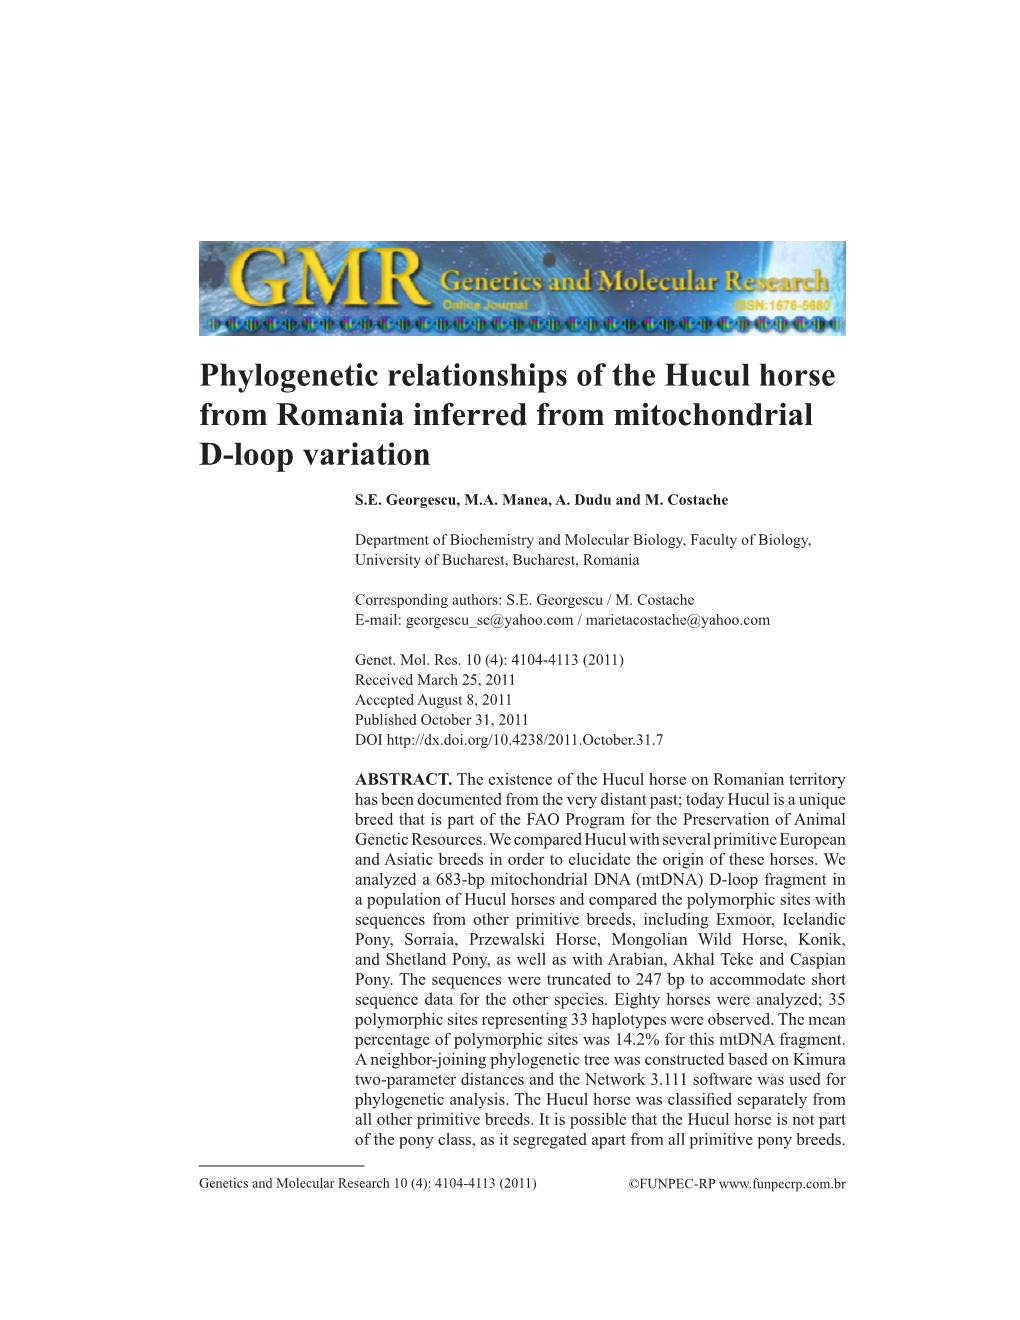 Phylogenetic Relationships of the Hucul Horse from Romania Inferred from Mitochondrial D-Loop Variation